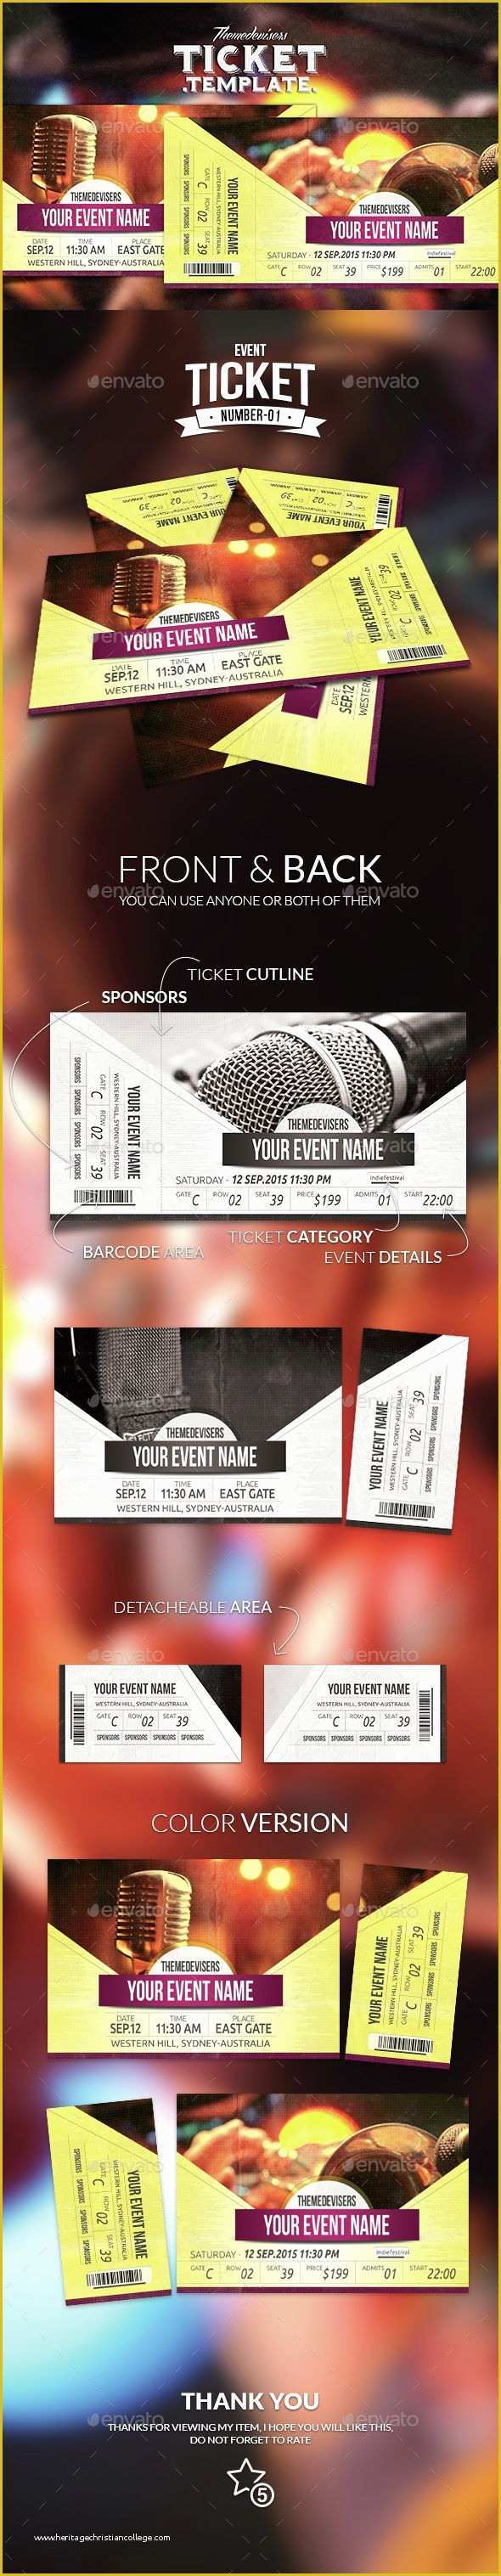 Event Ticket Template Psd Free Download Of Best 25 Concert Ticket Template Ideas On Pinterest